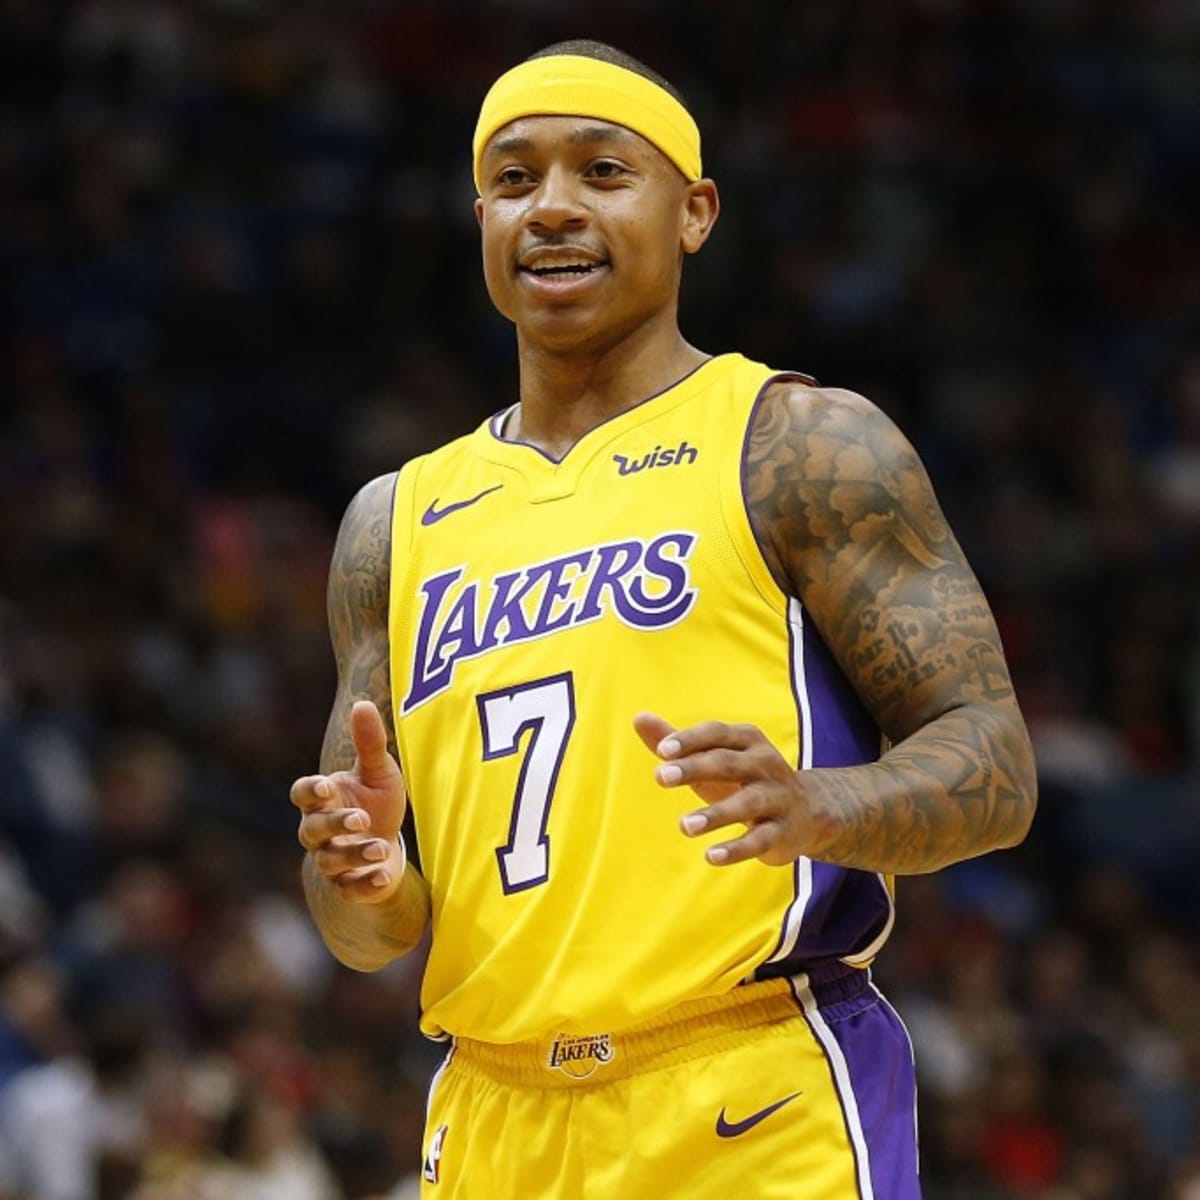 Lakers' Isaiah Thomas: 'All you need is 1 team to love you' – WKTY